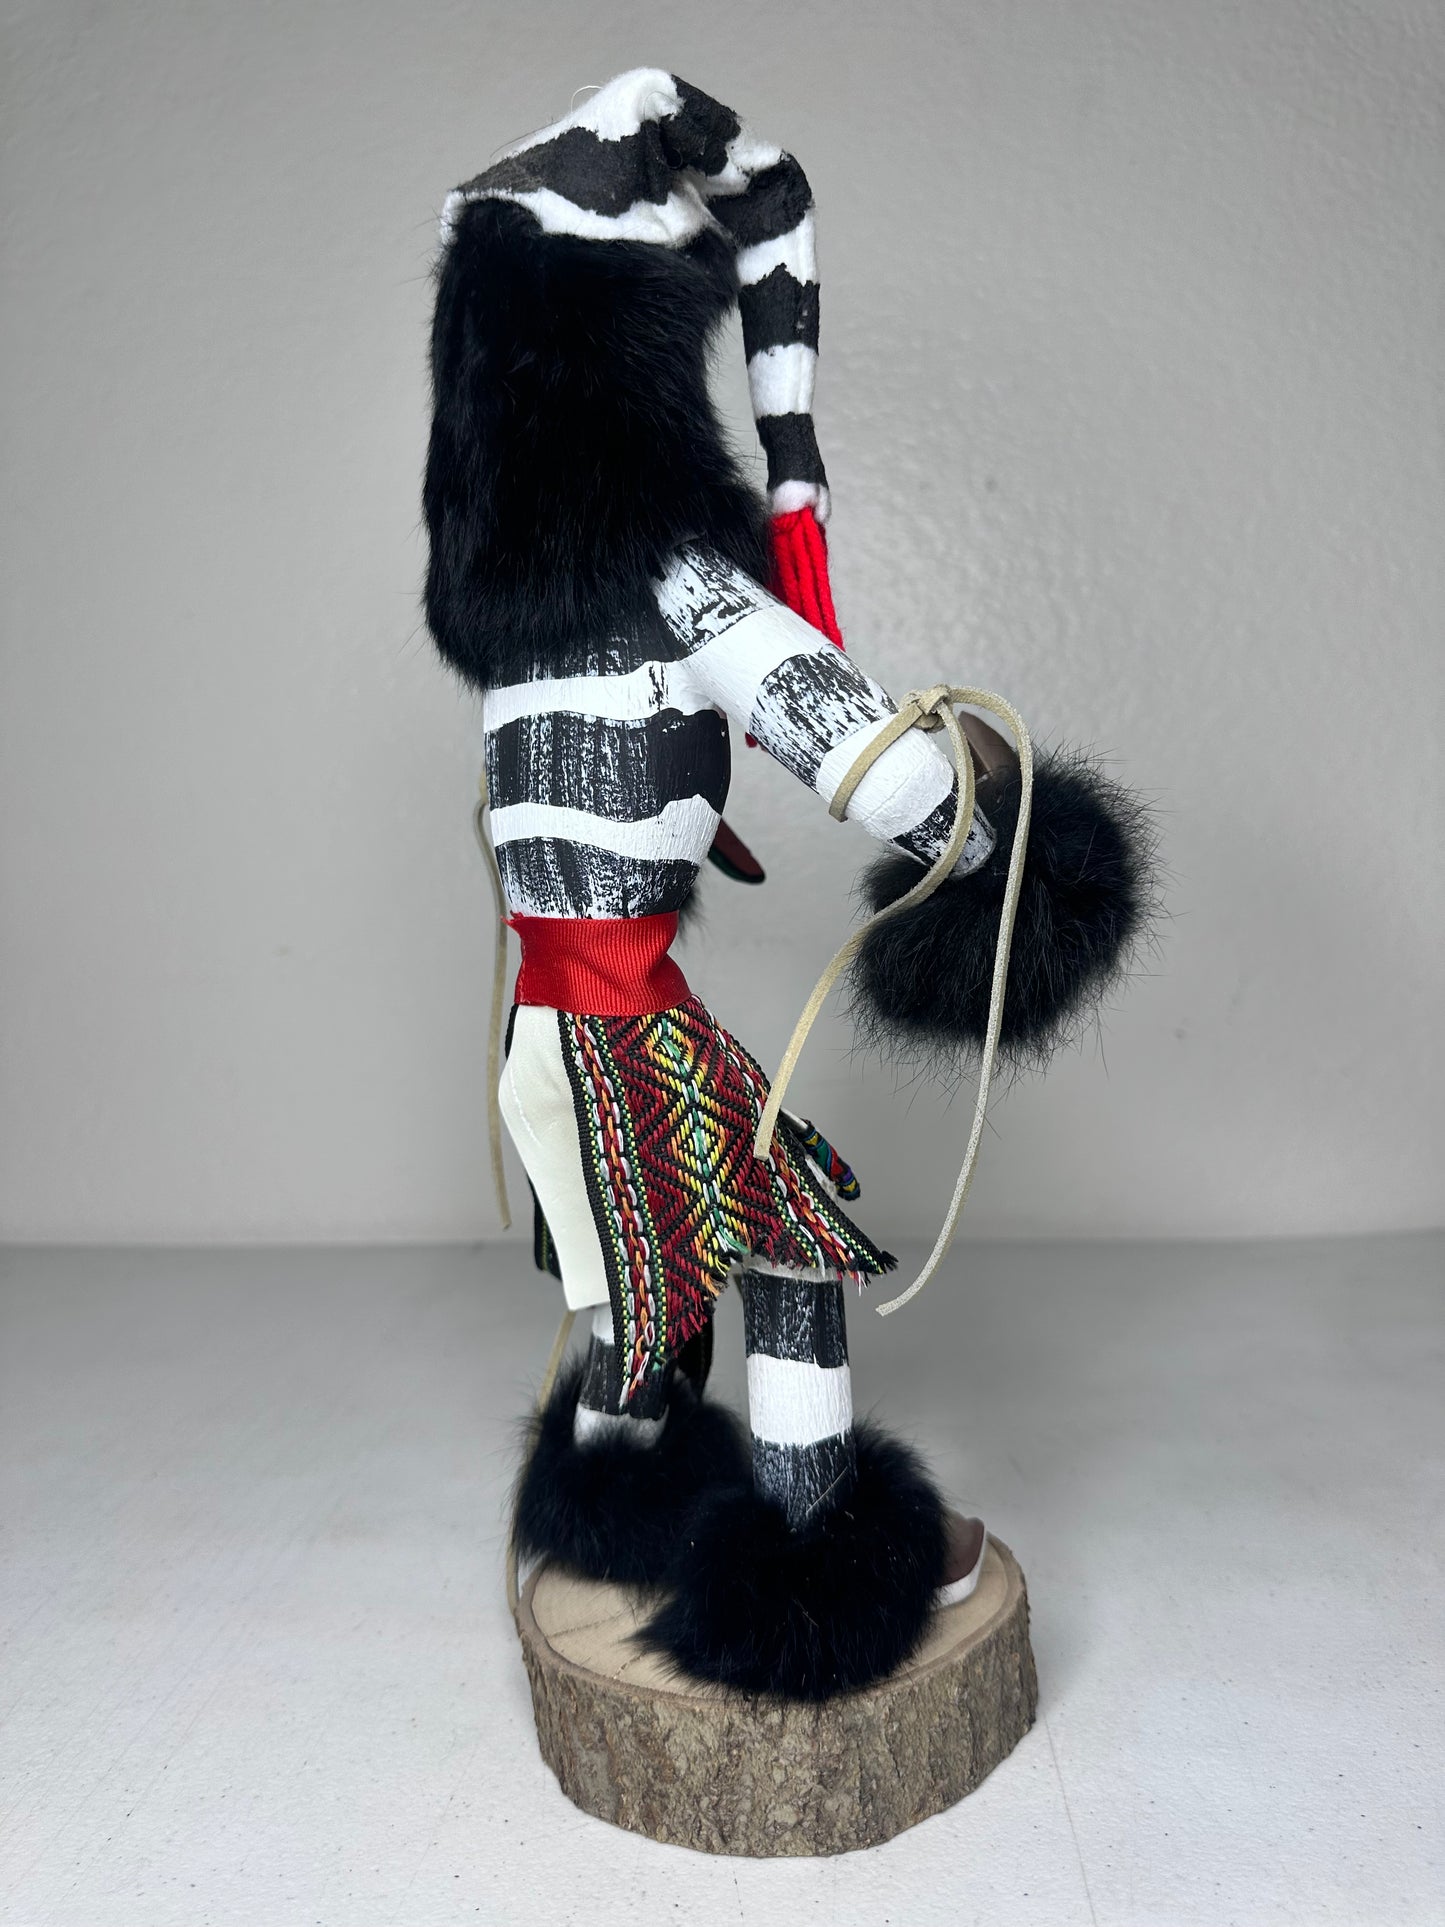 Authentic 15” Hano Clown Kachina Doll by Little Dove - Handcrafted Native American Art